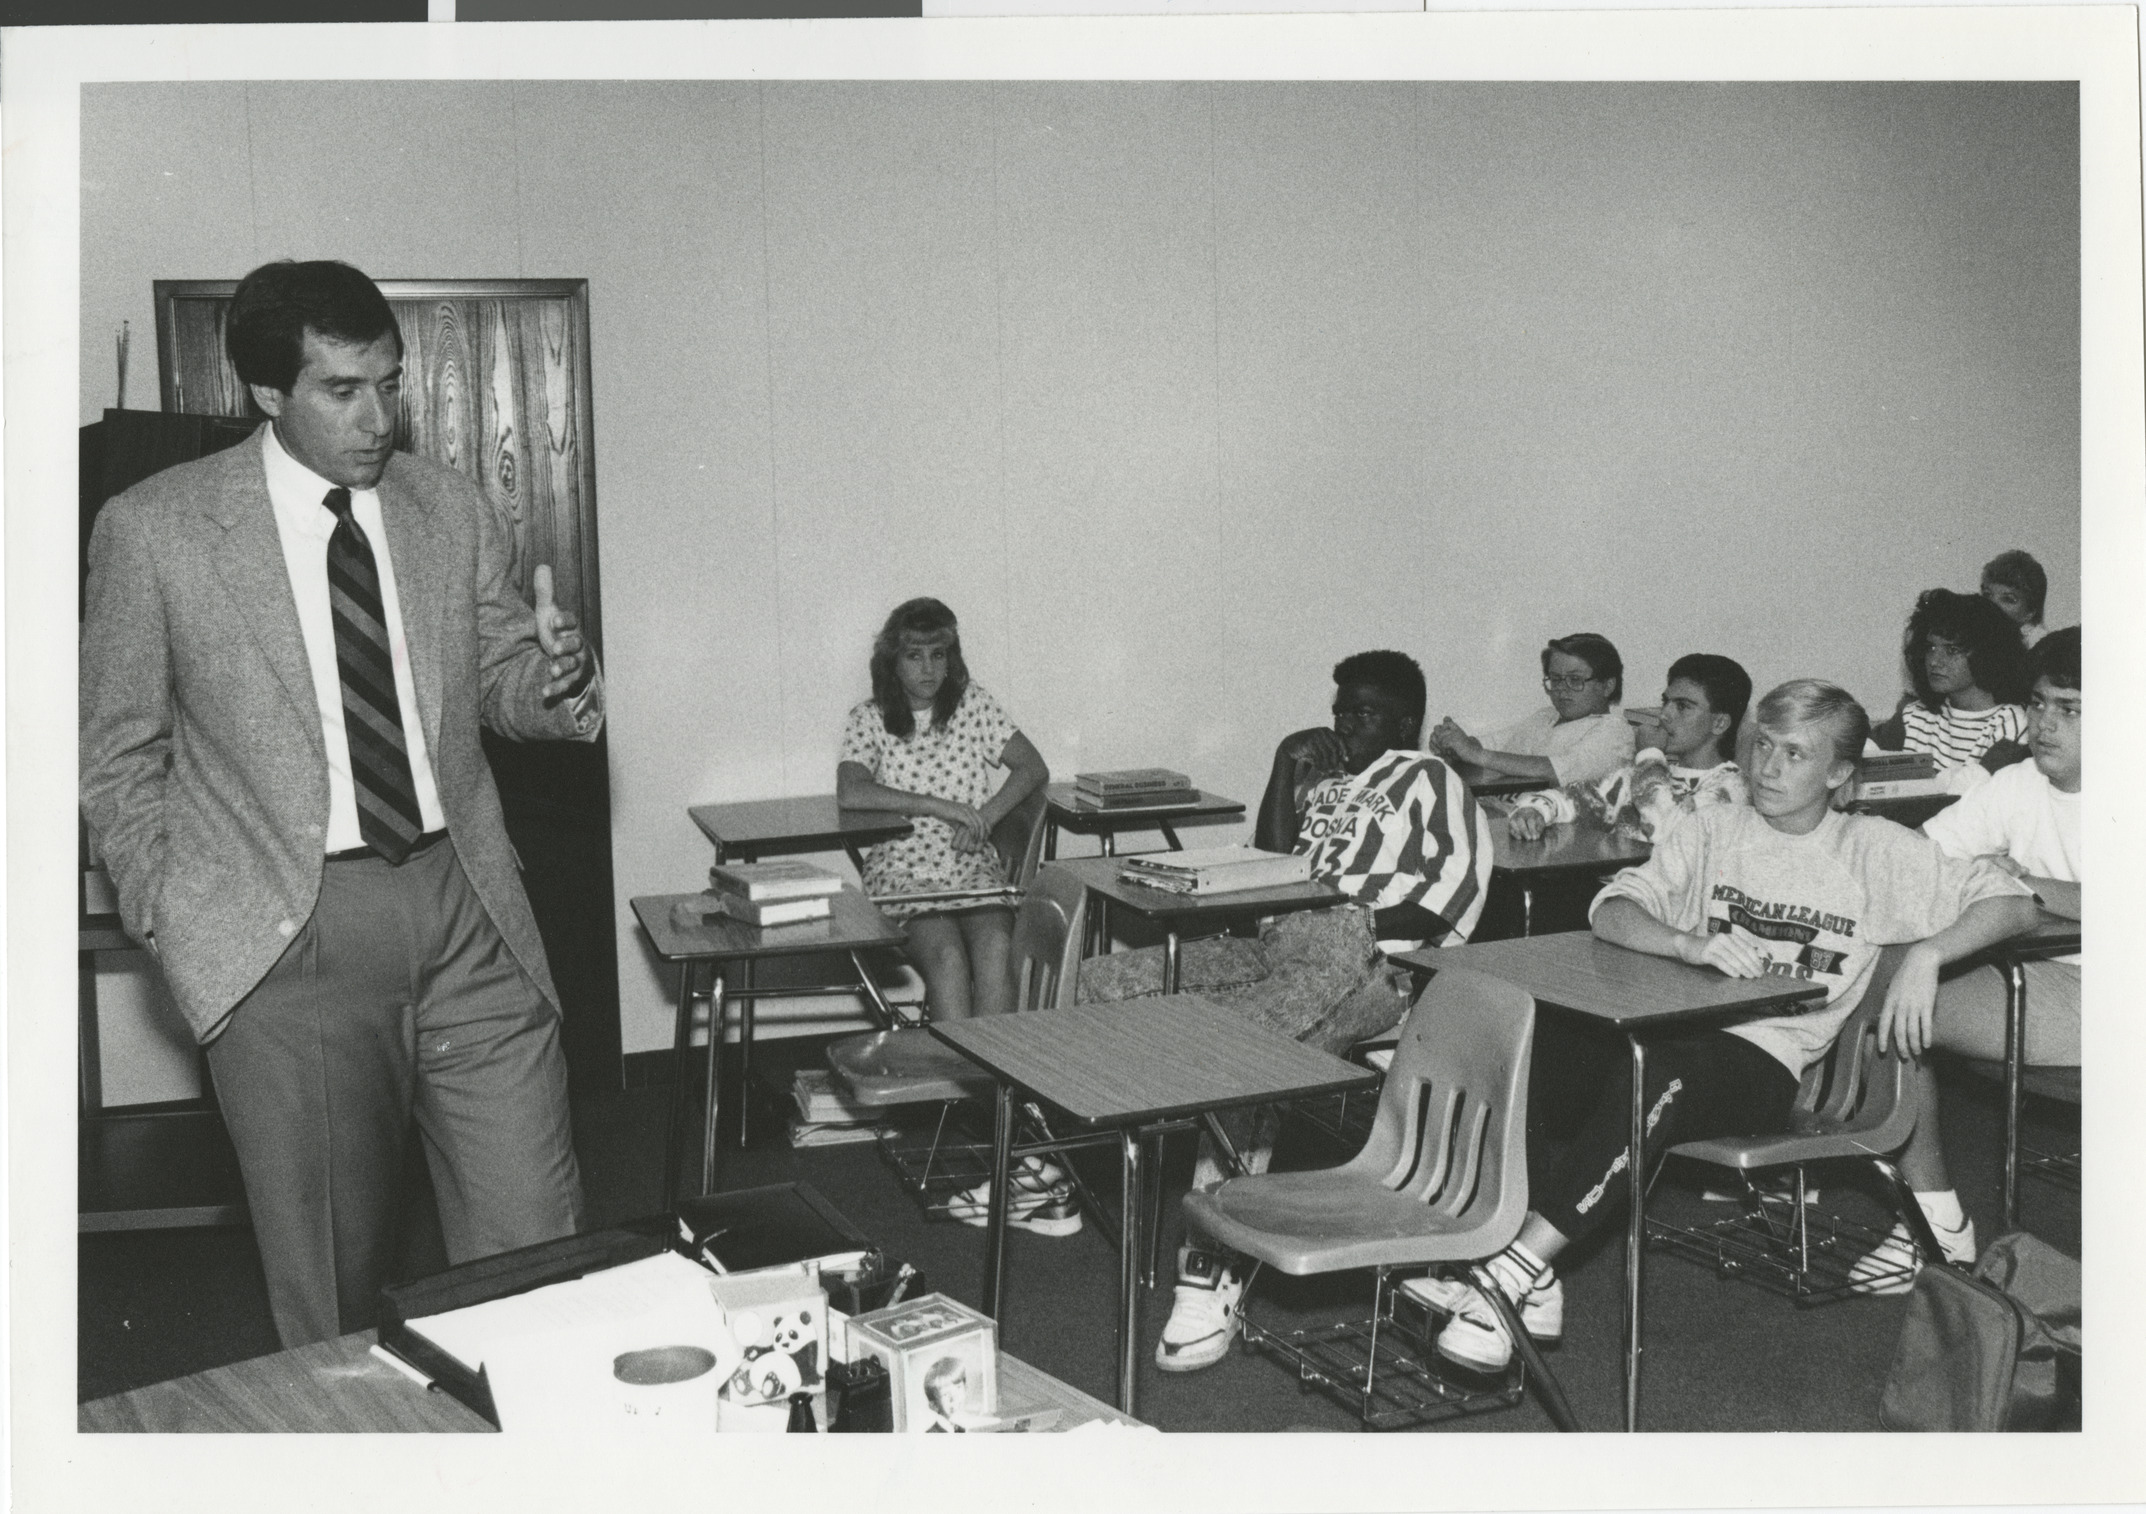 Photograph of Mark Fine speaking to students in a classroom, undated